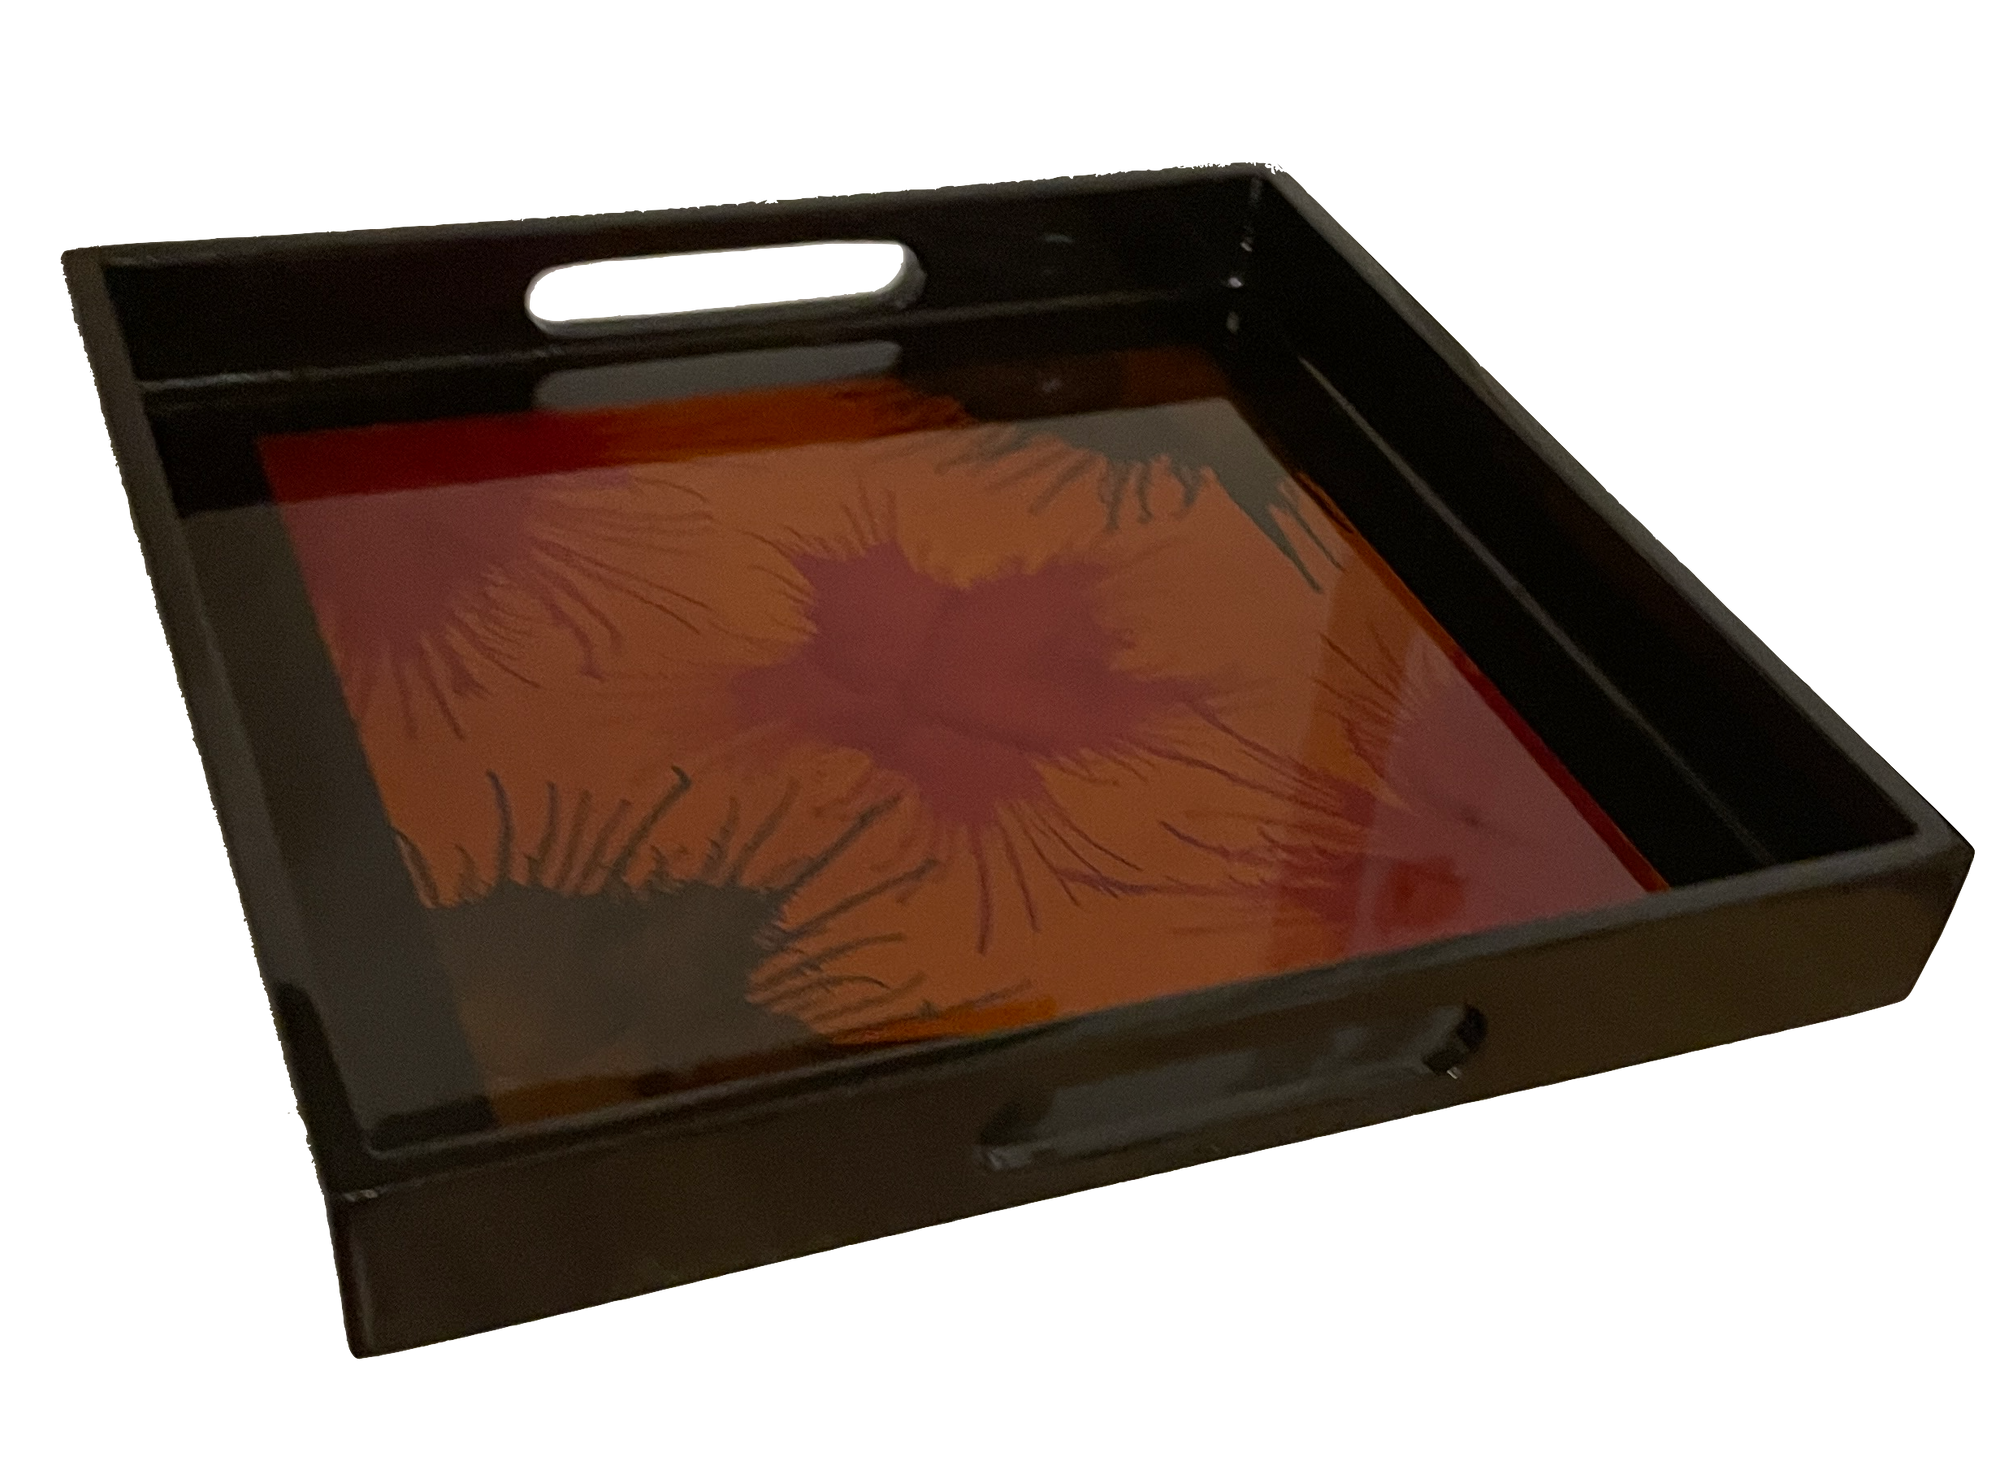 Lacquerware Square Tray with Handles - choose your colour